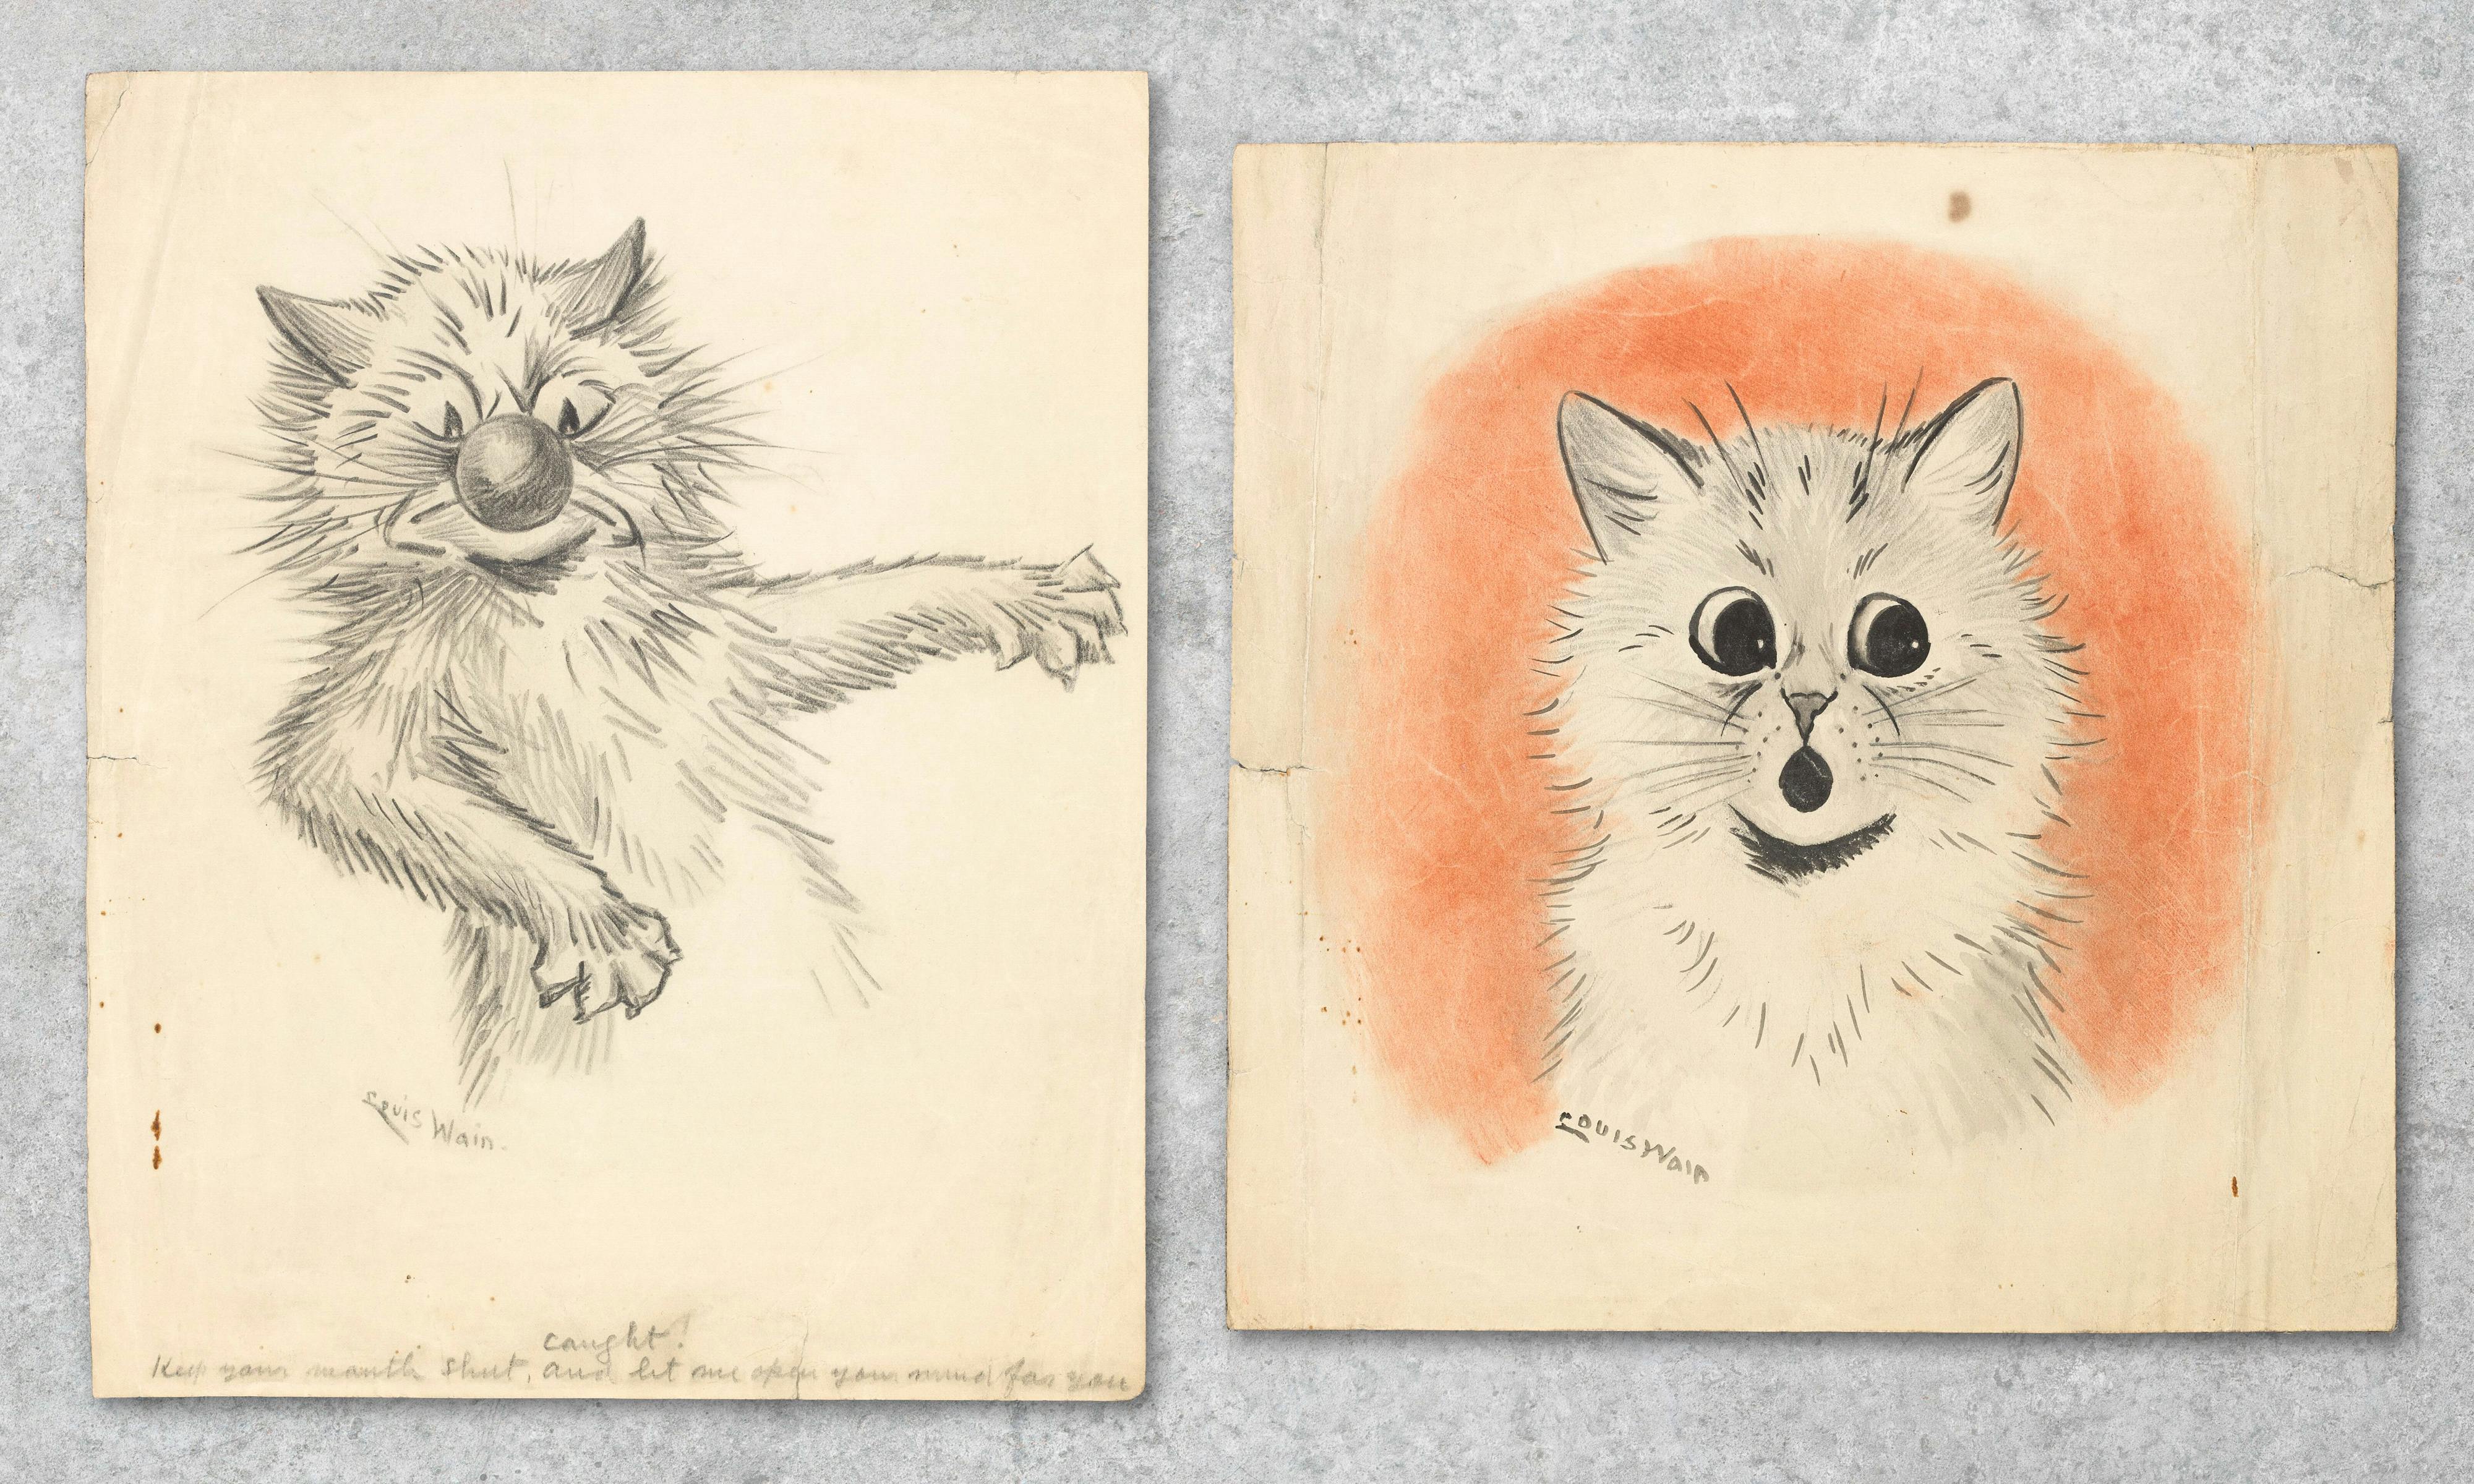 Cute Cats and Psychedelia: The Tragic Life of Louis Wain - Illustration  Chronicles